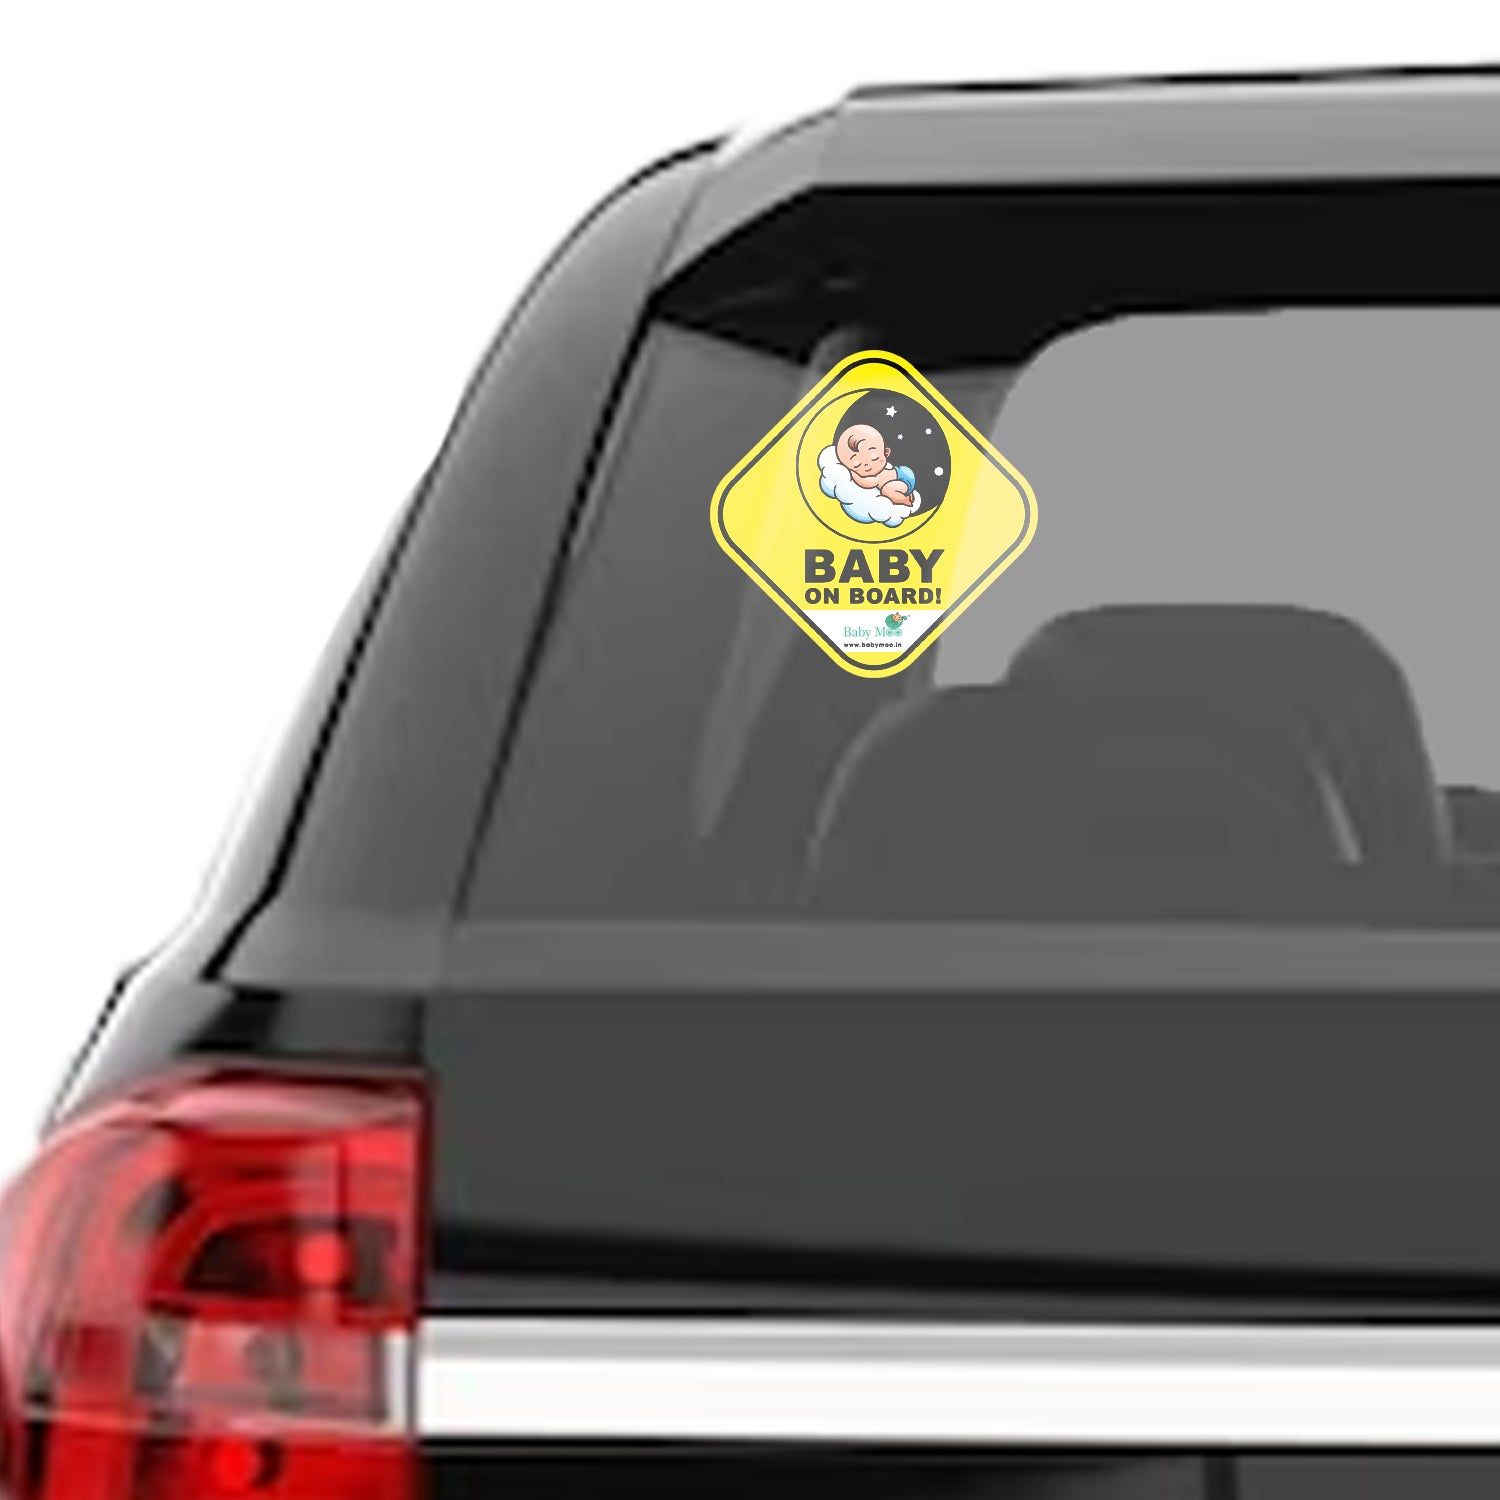 Baby Moo Car Safety Sign Snoozing Angel Baby On Board With Suction Cup Clip 2 Pack - Yellow